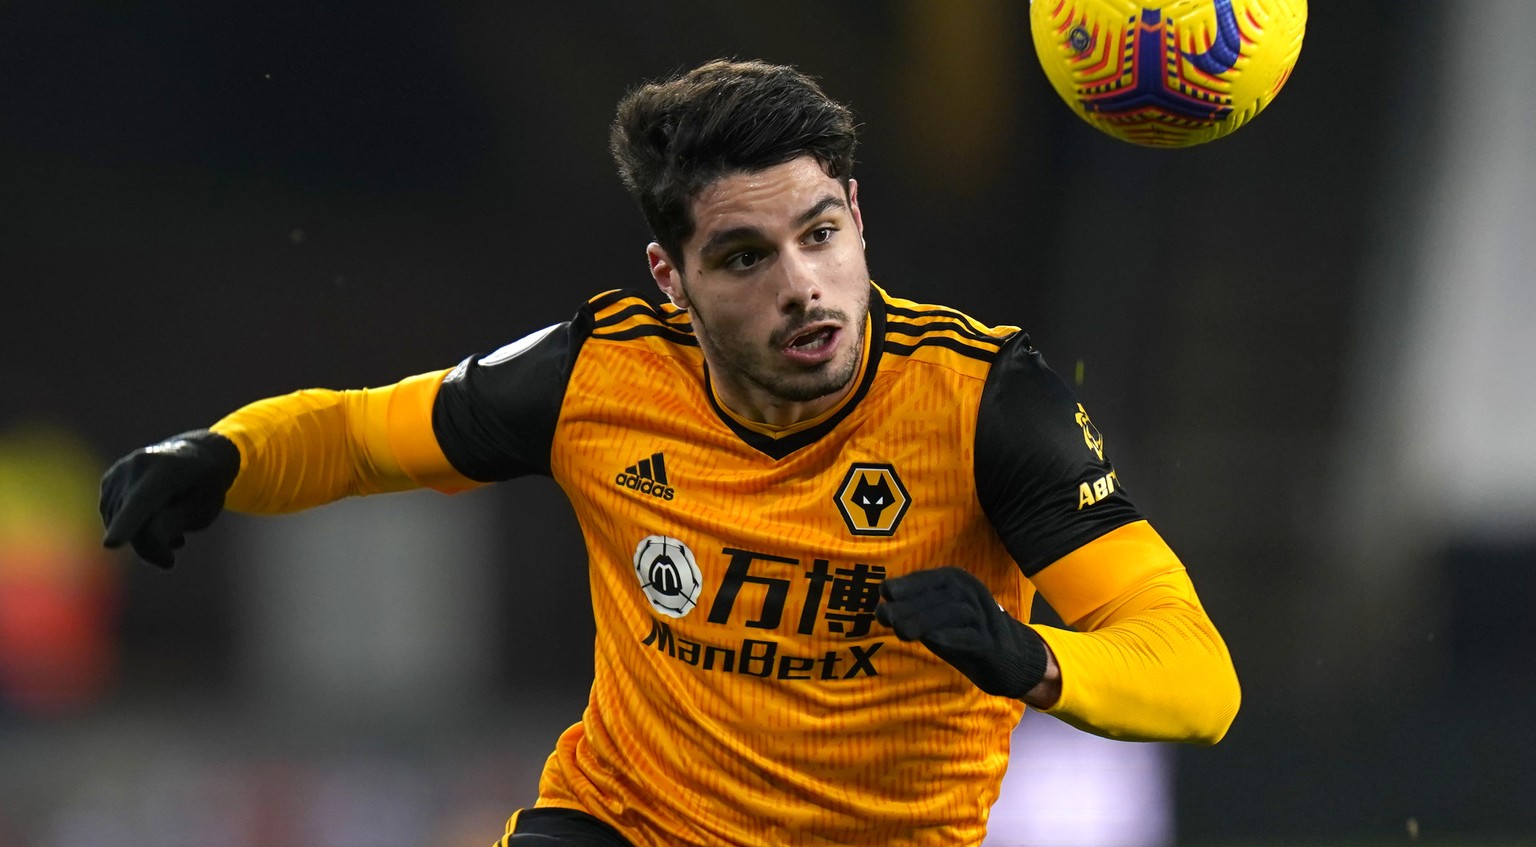 Wolverhampton Wanderers&#039; Pedro Neto controls the ball during the English Premier League soccer match between Wolverhampton Wanderers and Everton at the Molineux Stadium in Wolverhampton, England, ...